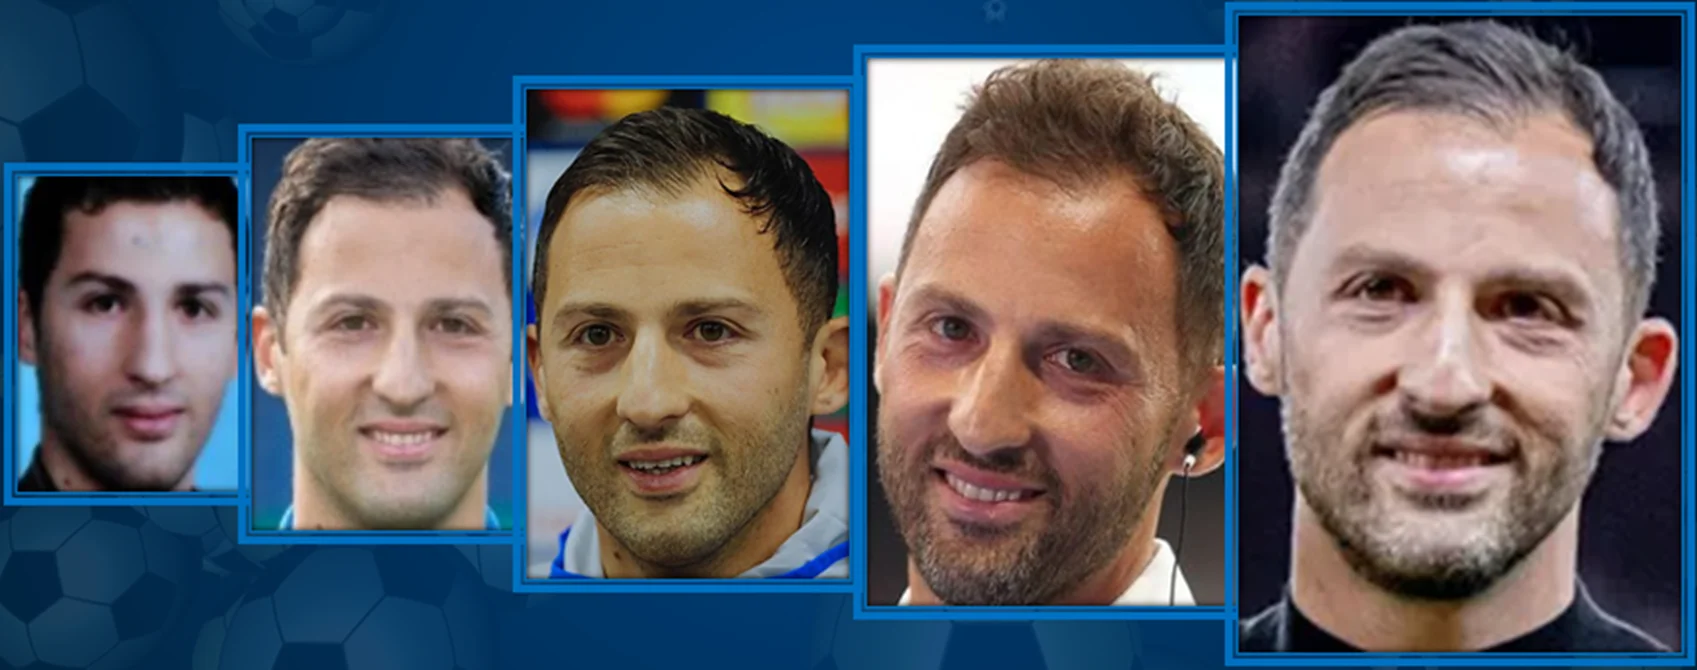 Domenico Tedesco Biography - A pictorial trajectory of from his early years to the moment he became famous. Sources: Sudinfo, Twitter/Domenico2112s, Wikipedia, Instagram/dmncts/, Transfermarkt.